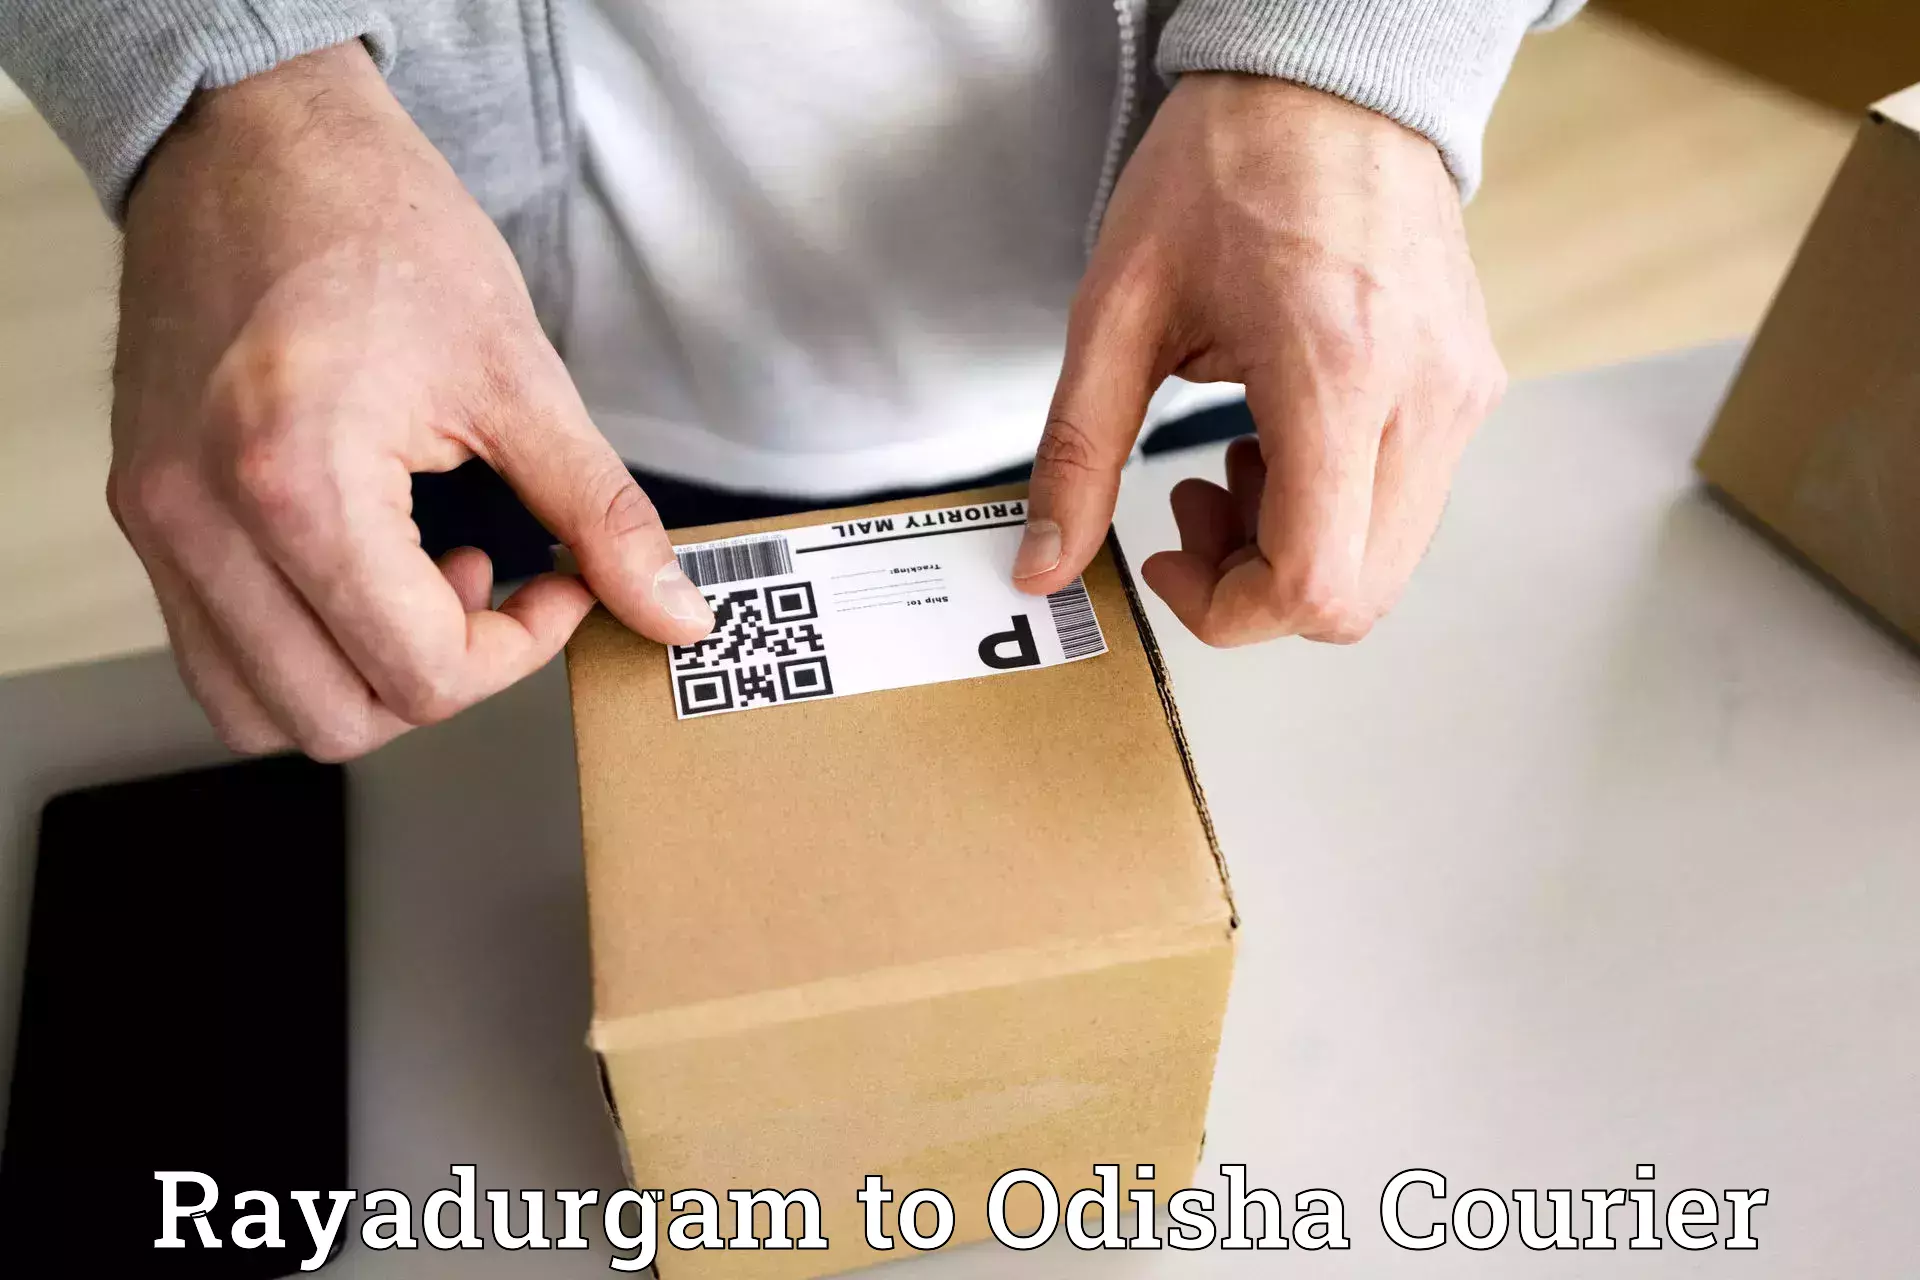 User-friendly delivery service Rayadurgam to Galleri